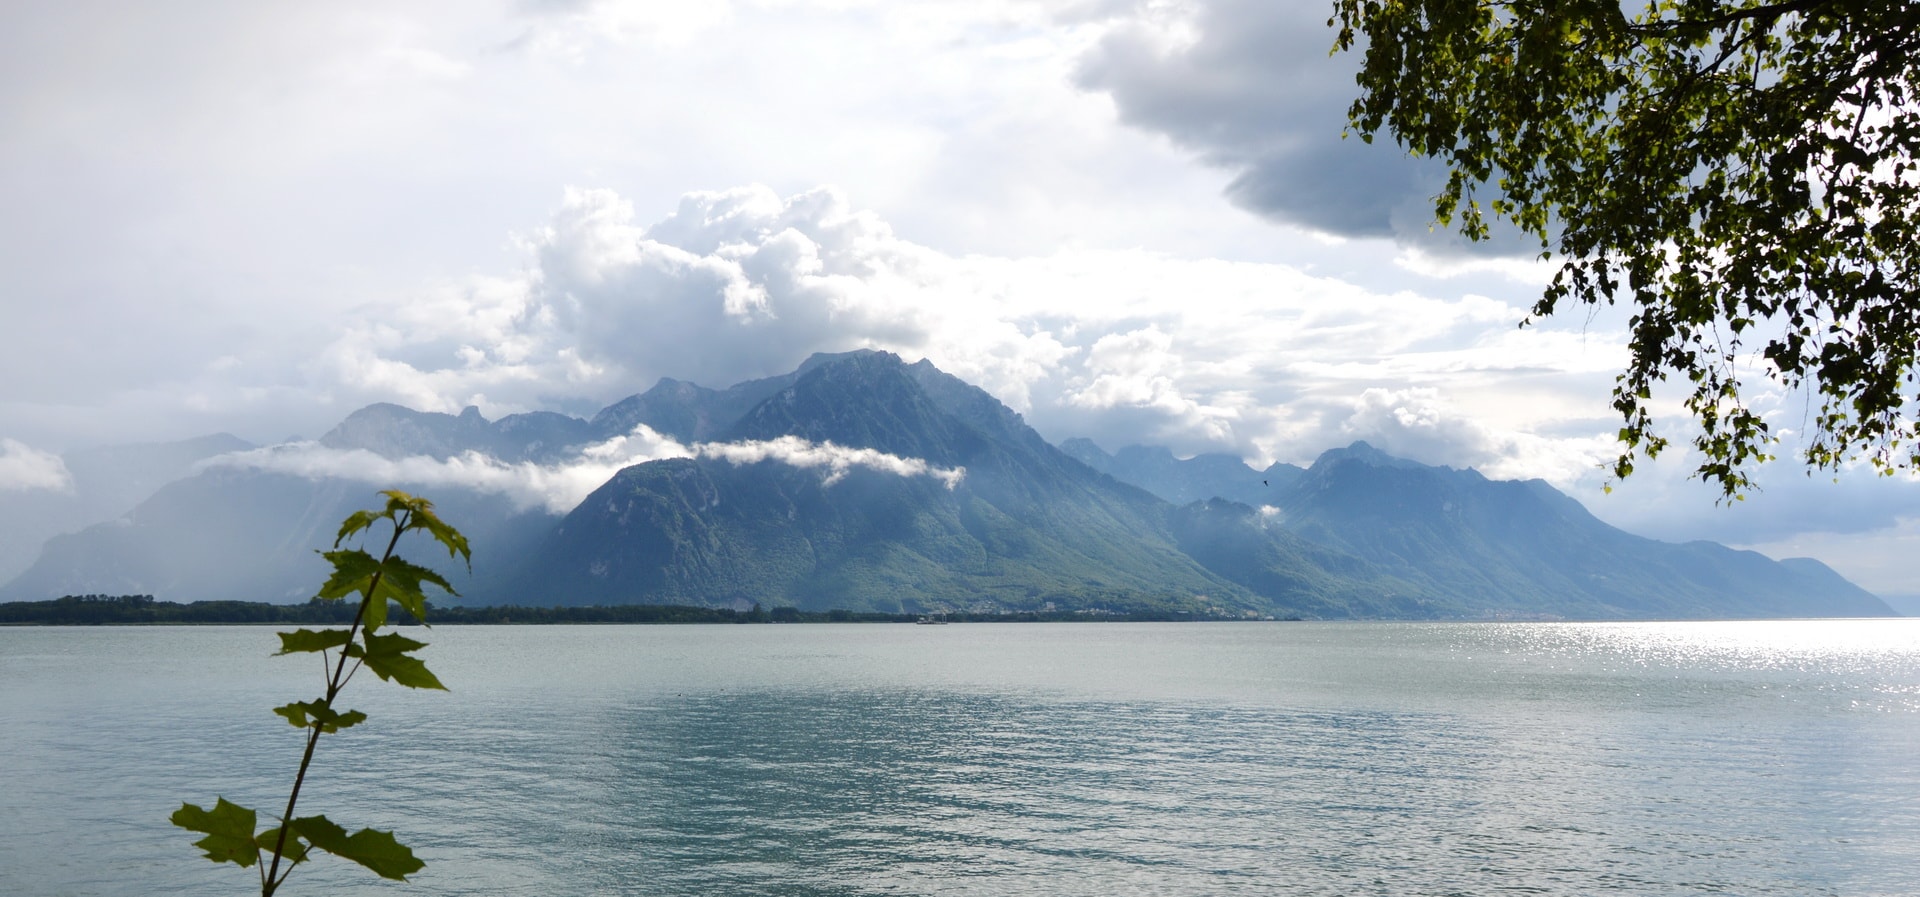 The eastern part of Lake Geneva is surrounded by high mountains